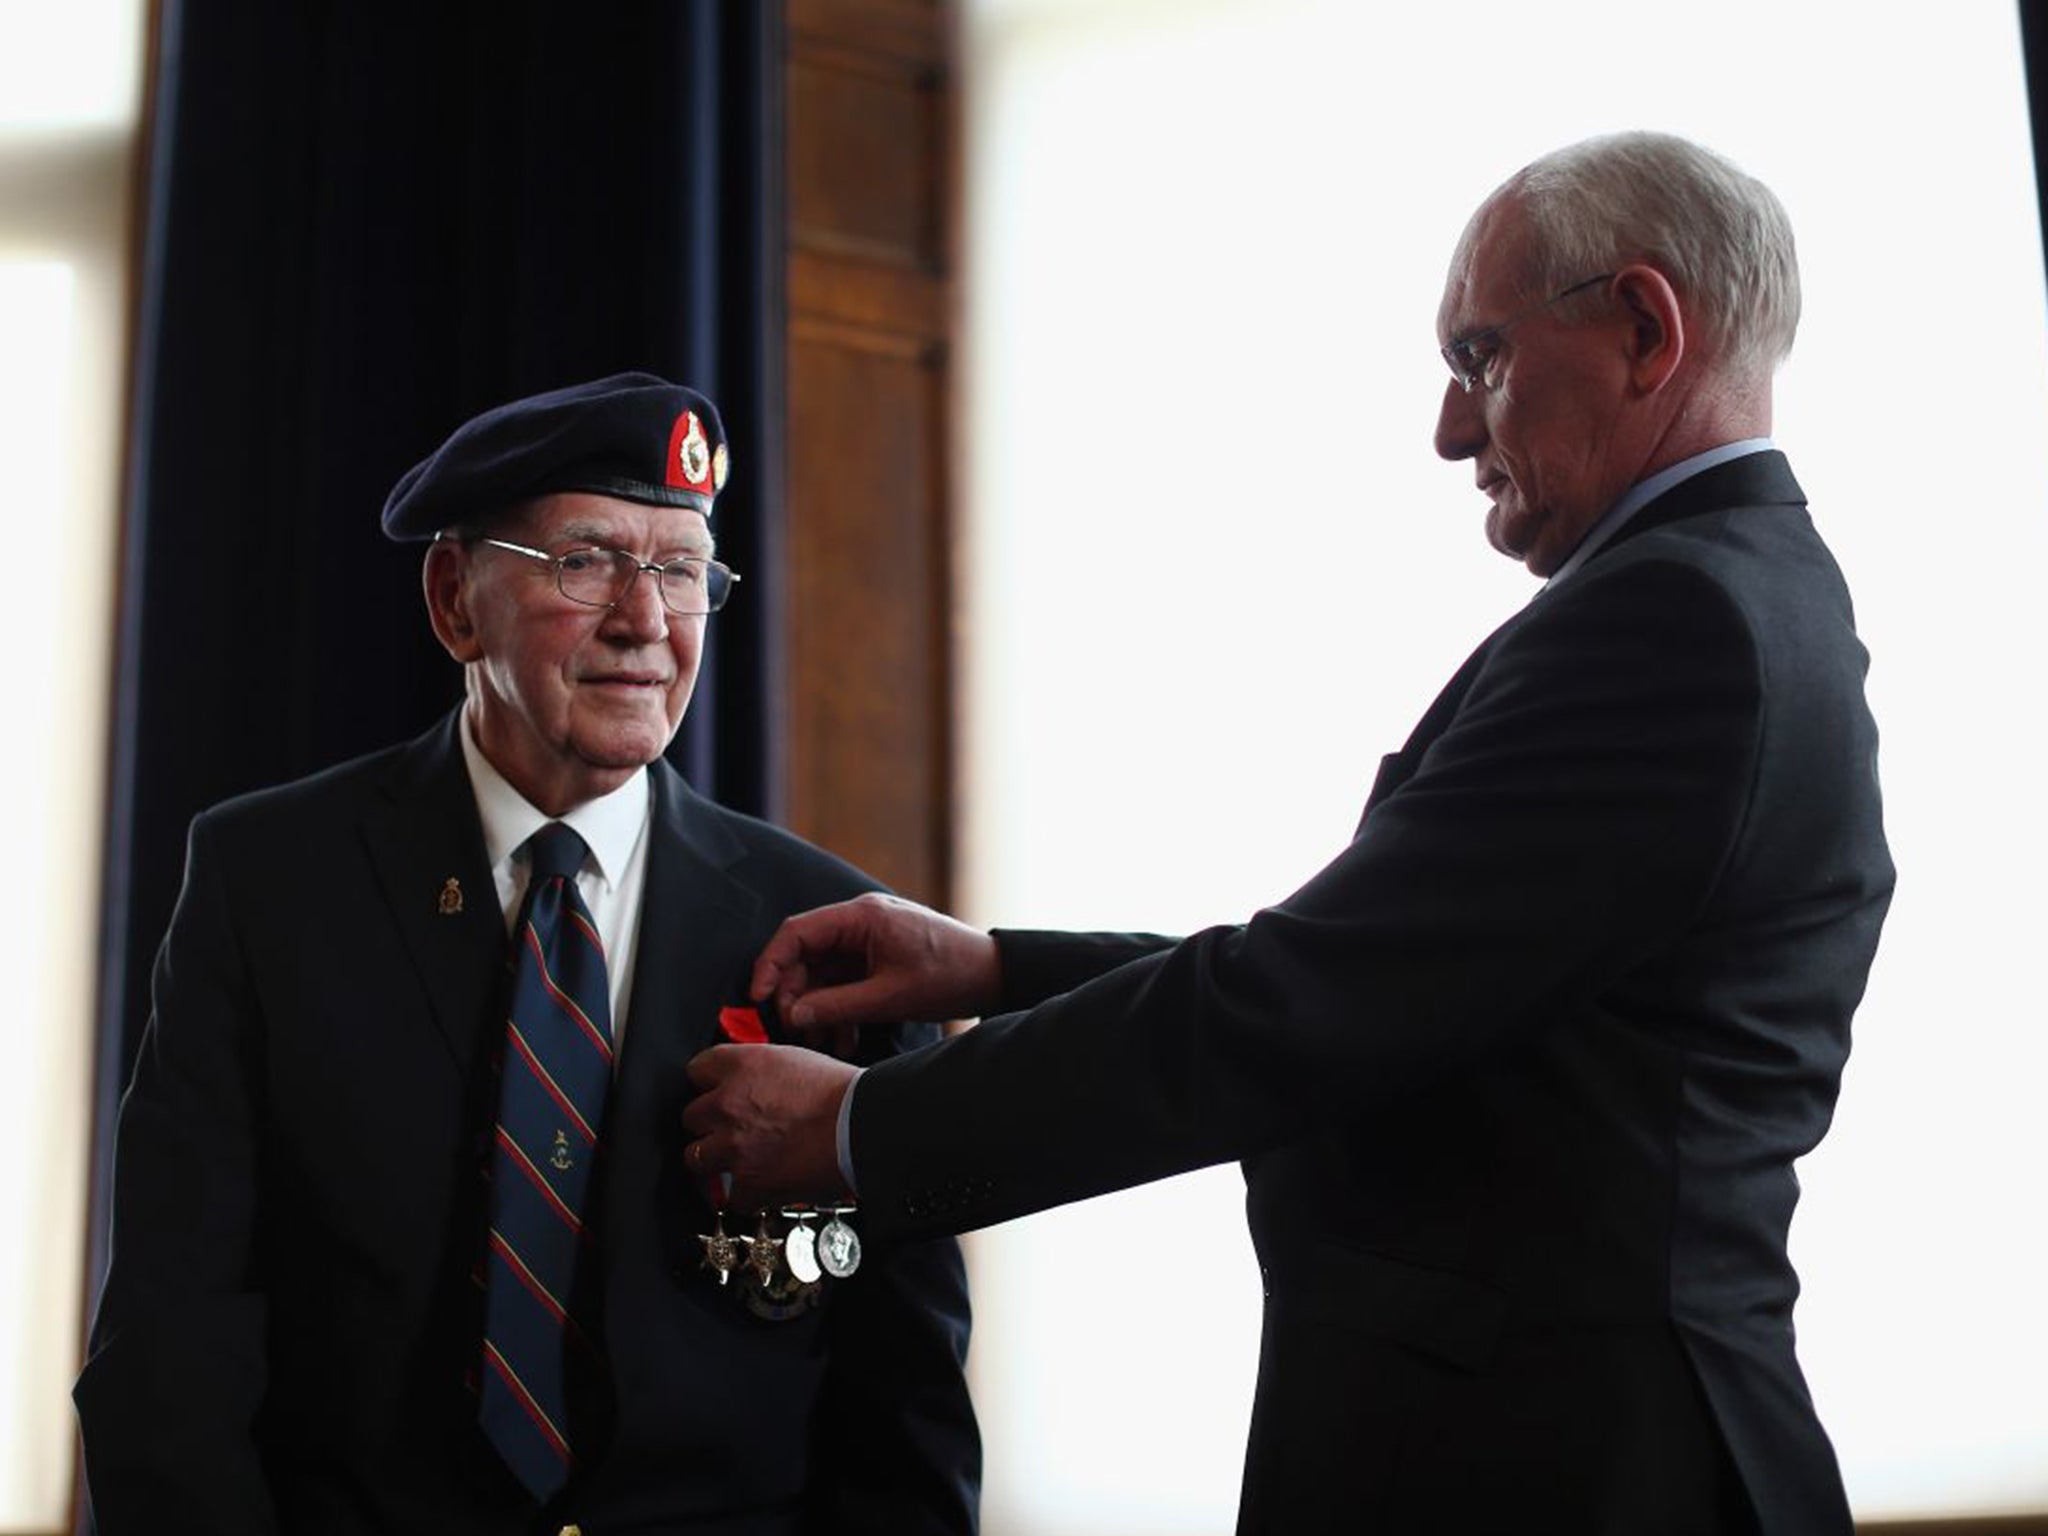 D-Day veteran Ted Turner, 89, was awarded the 'Legion d'Honneur' by Captain Francois Jean, the Consul Honoraire of France, on behalf of French president Francois Hollande, at a ceremony at the Royal Marines Museum in Southsea